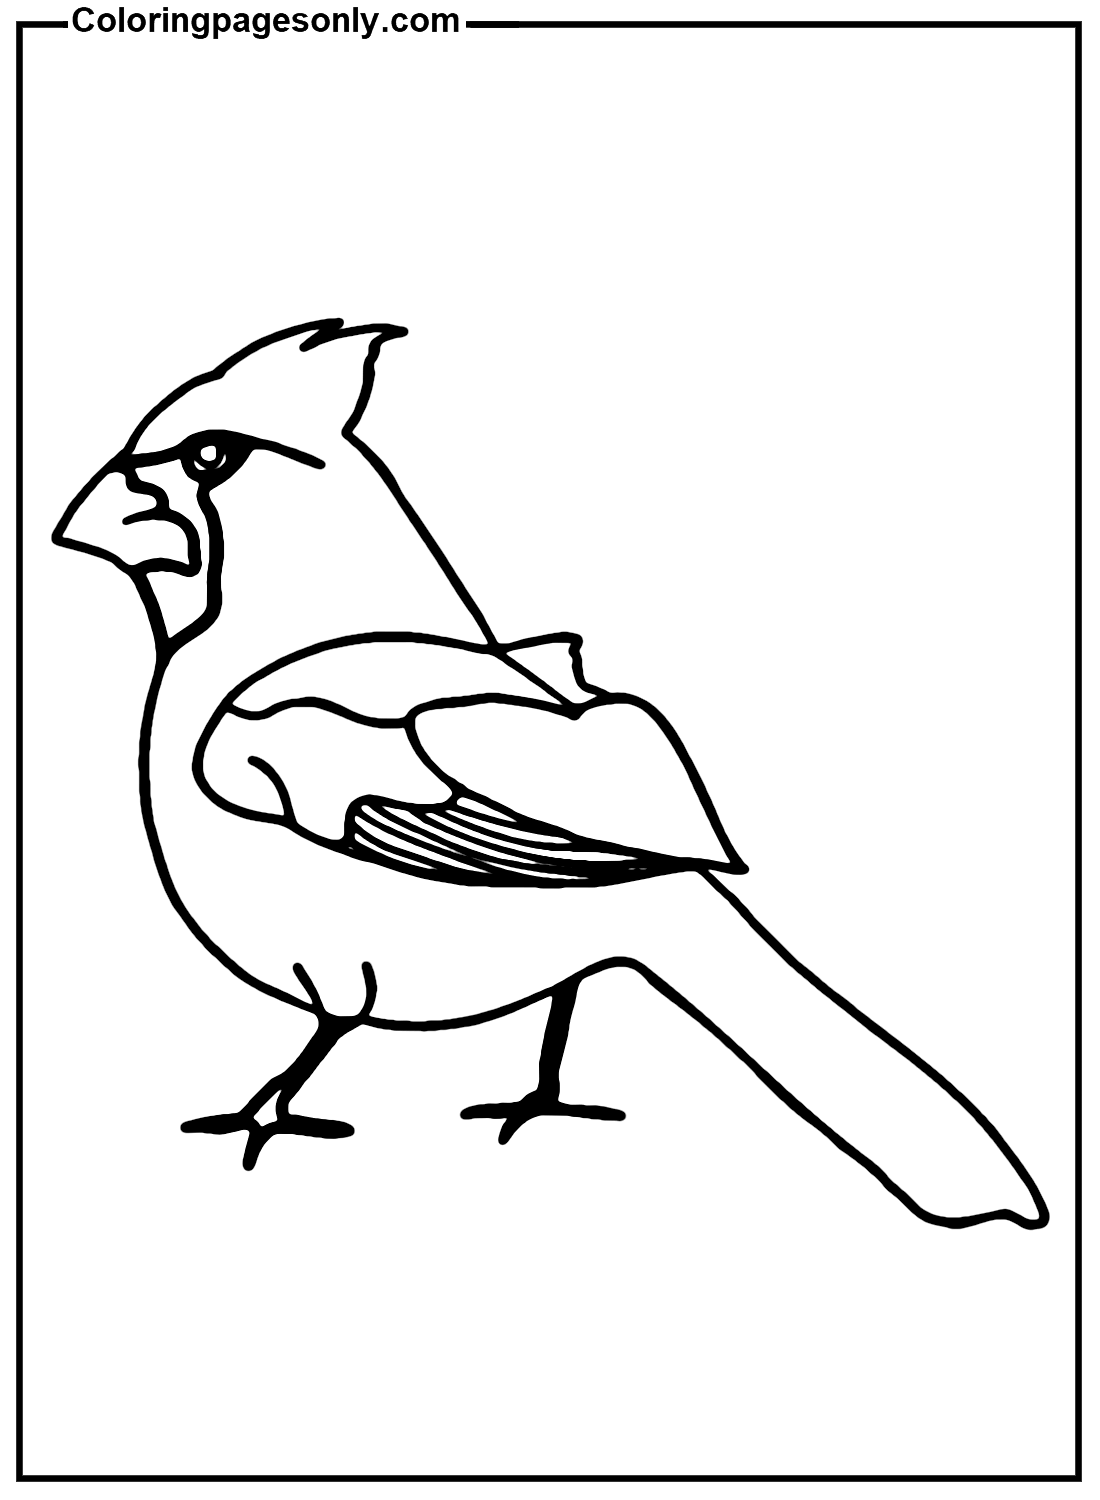 Cardinal Image to Print Coloring Page - Free Printable Coloring Pages